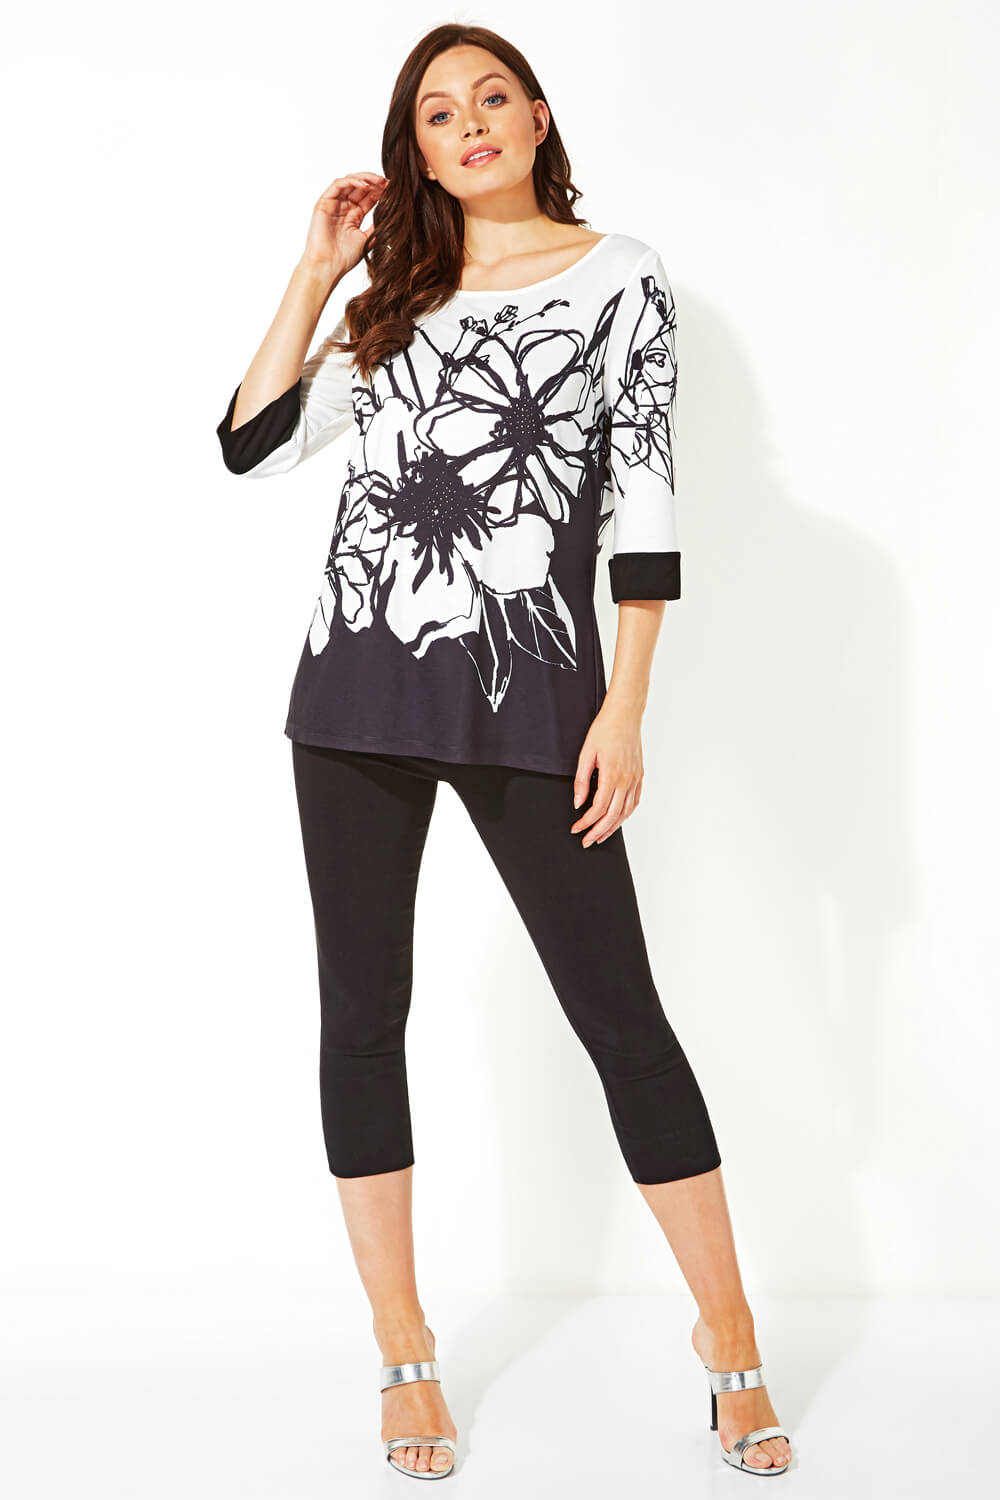 Ivory  Floral Print Contrast Top, Image 2 of 5